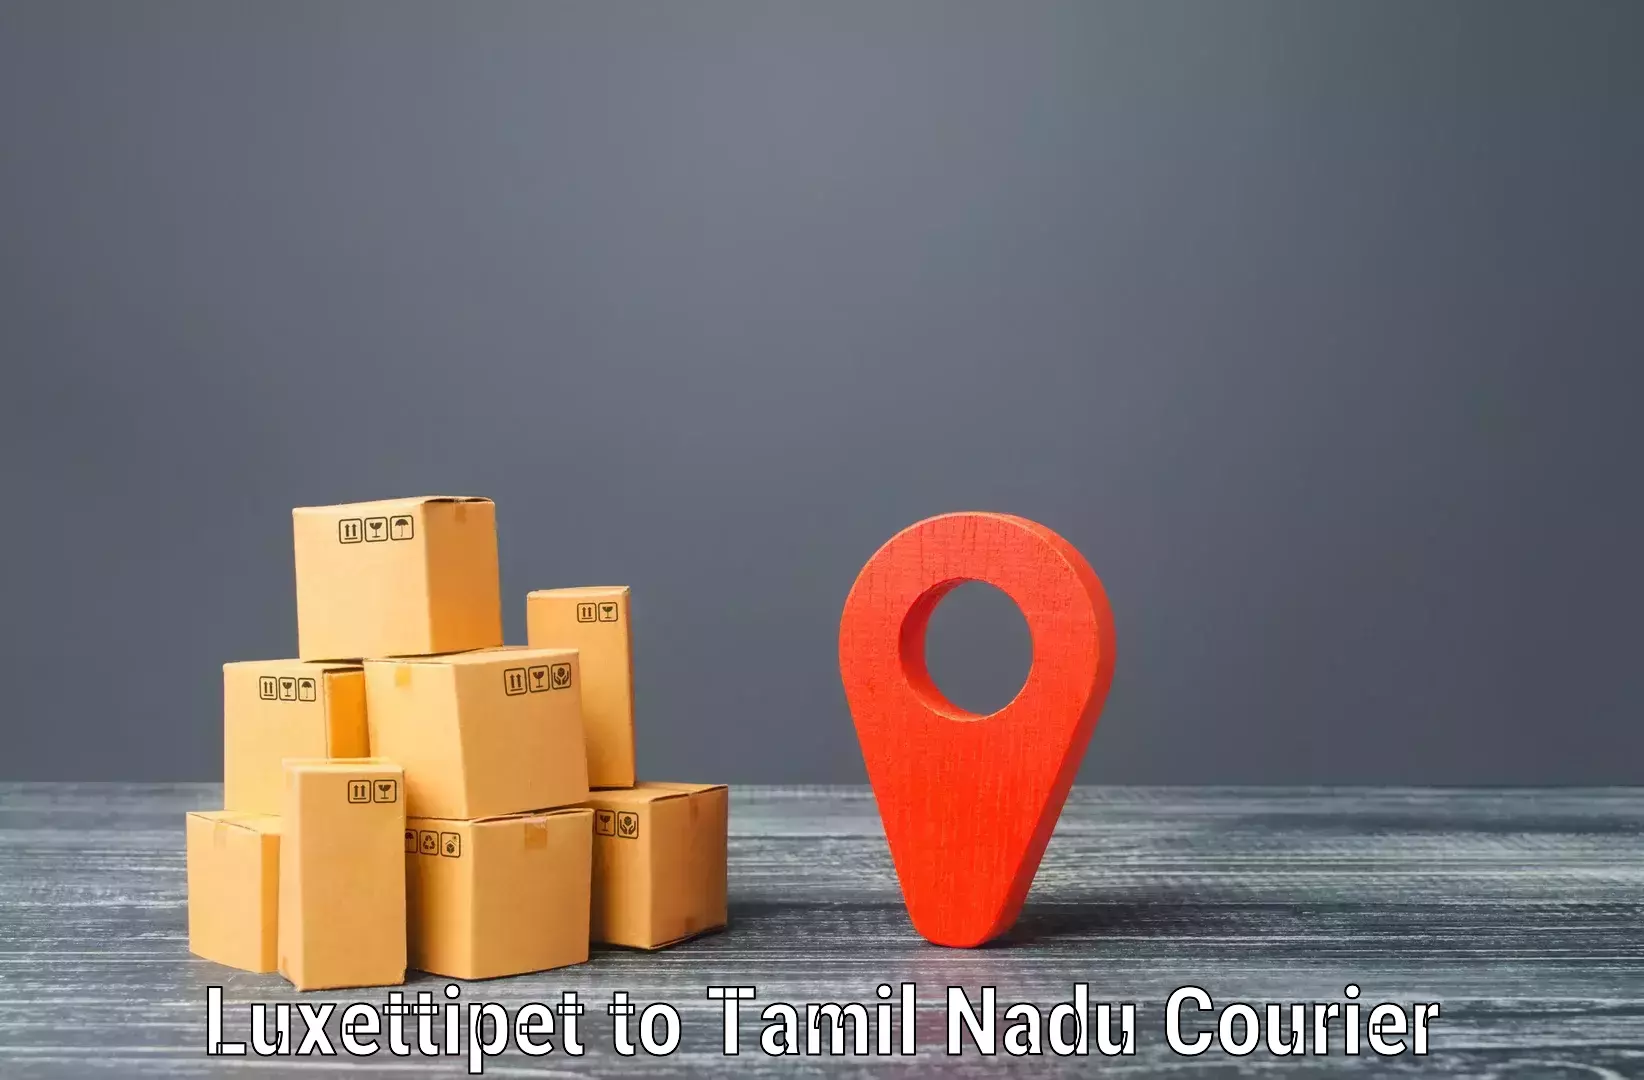 Advanced shipping network Luxettipet to Chennai